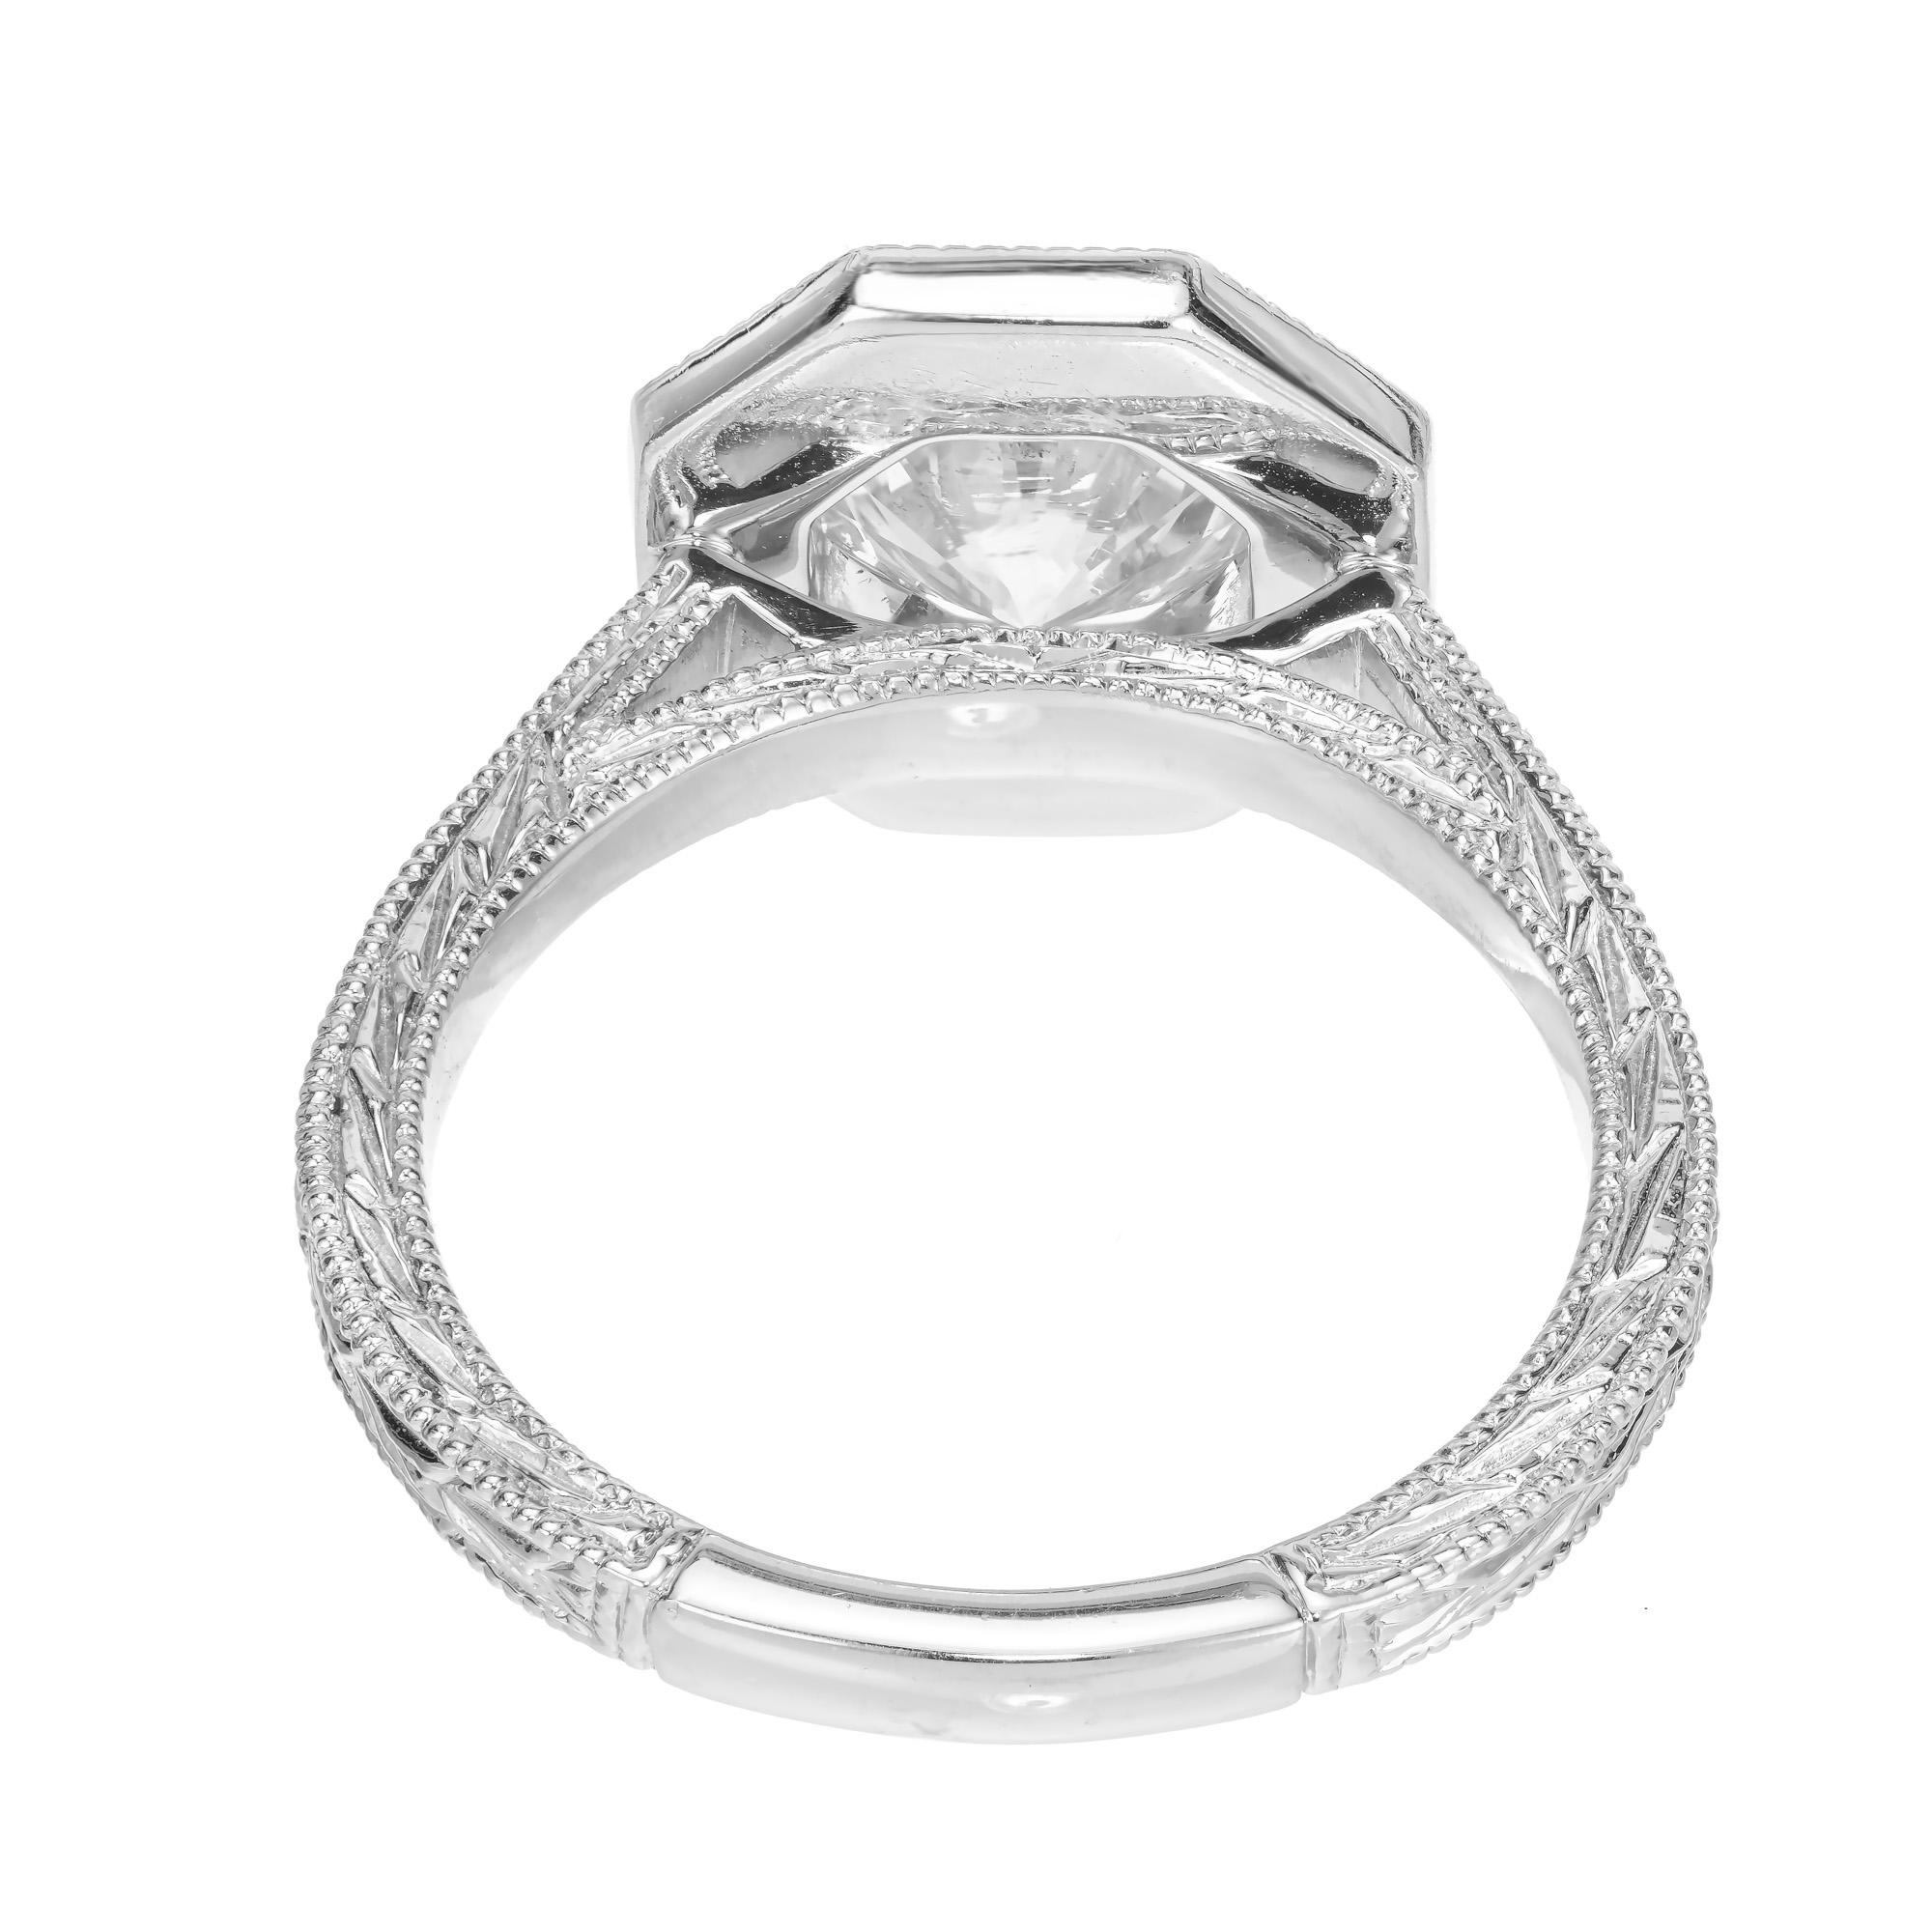 Peter Suchy GIA 1.53 Carat Diamond Halo Octagonal Platinum Engagement Ring In Excellent Condition For Sale In Stamford, CT